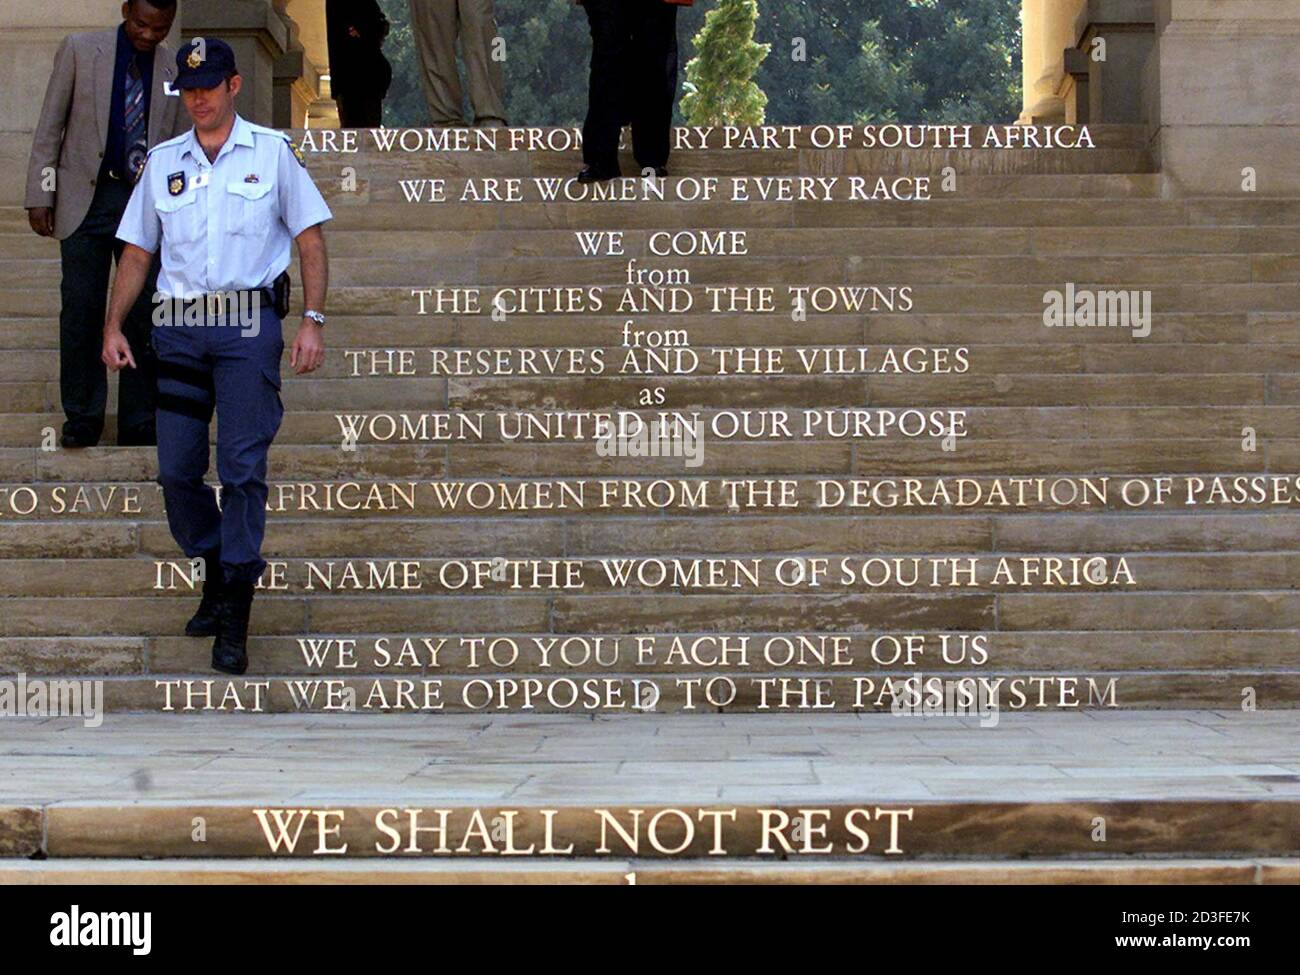 A South African Policeman Descends Stairs From A Memorial To Black Women Who Marched Against Apartheid And The Anti Black Pass Laws In 1956 The Stairs Carry As An Inscription The Text Of